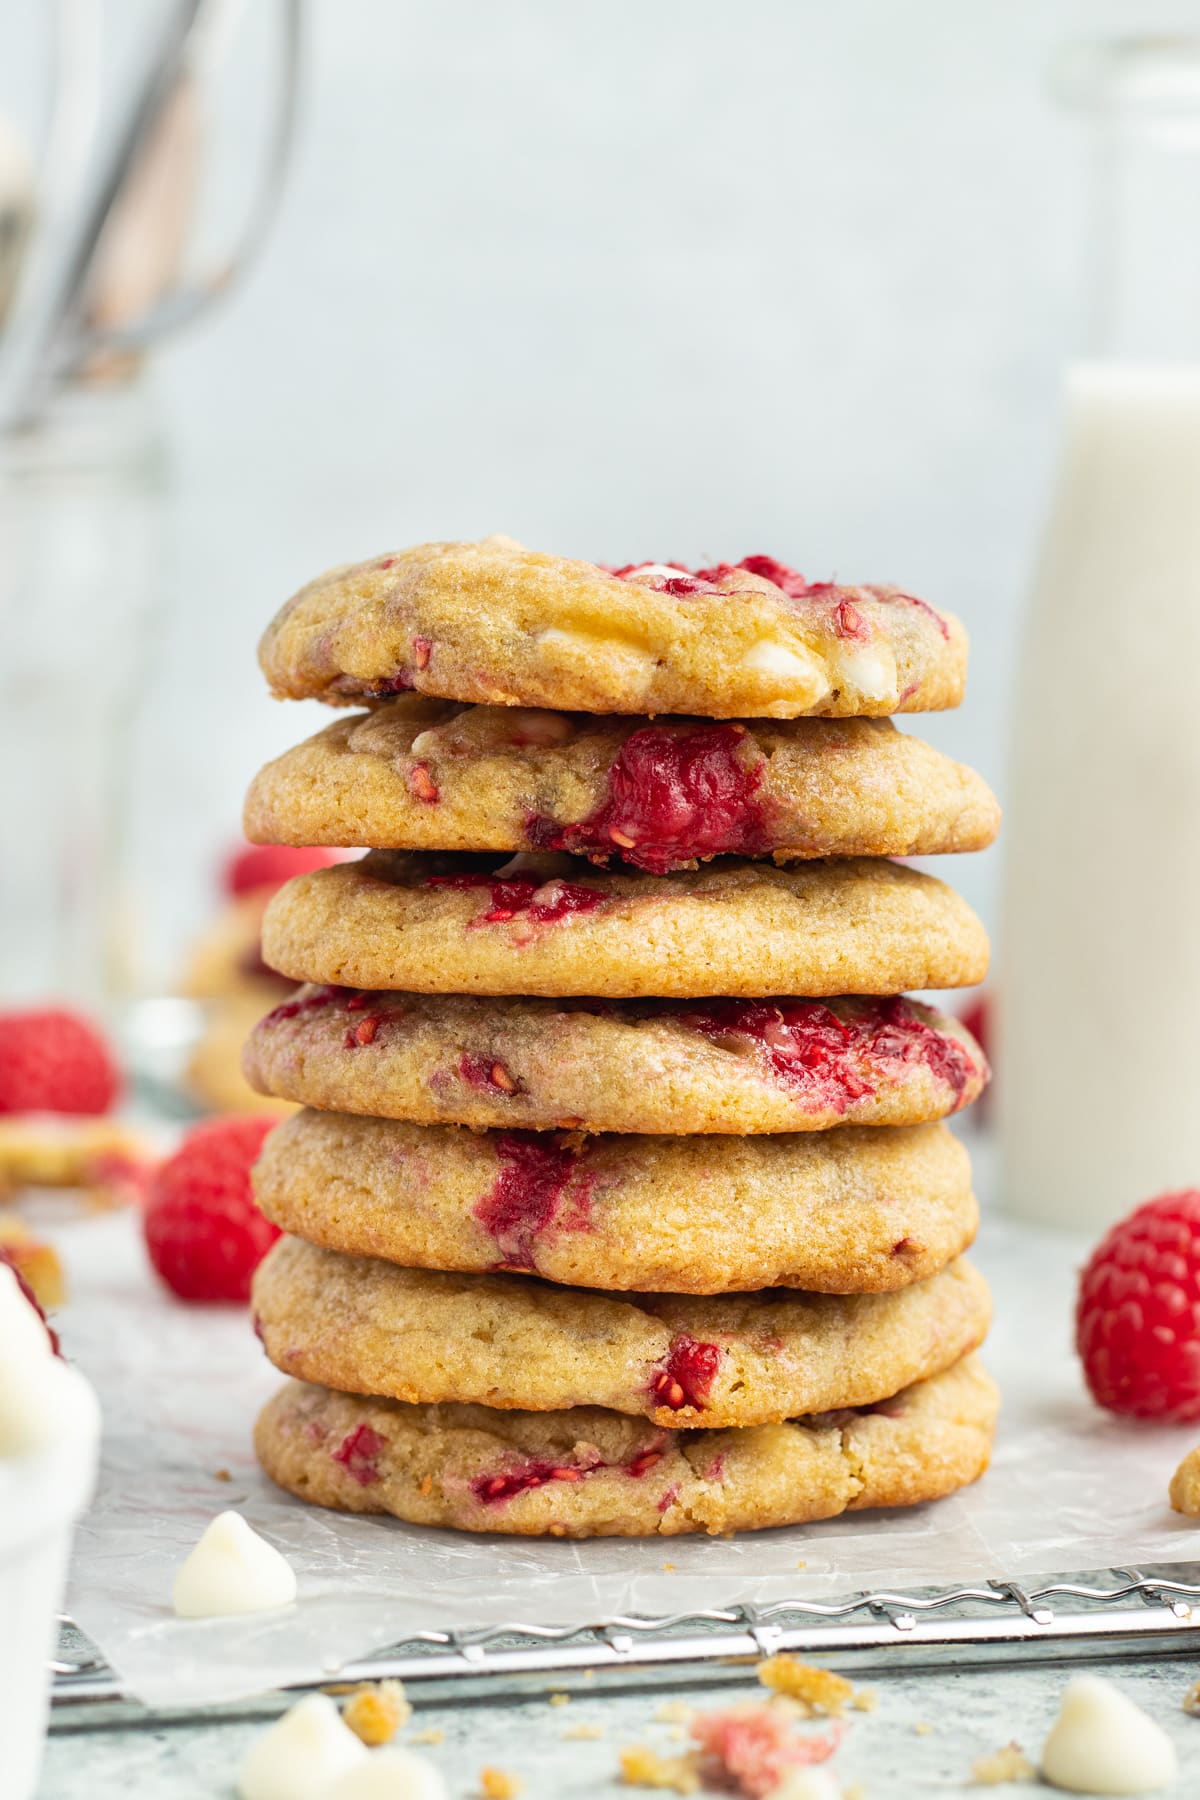 Picture of raspberry and white chocolate cookies in a stack.